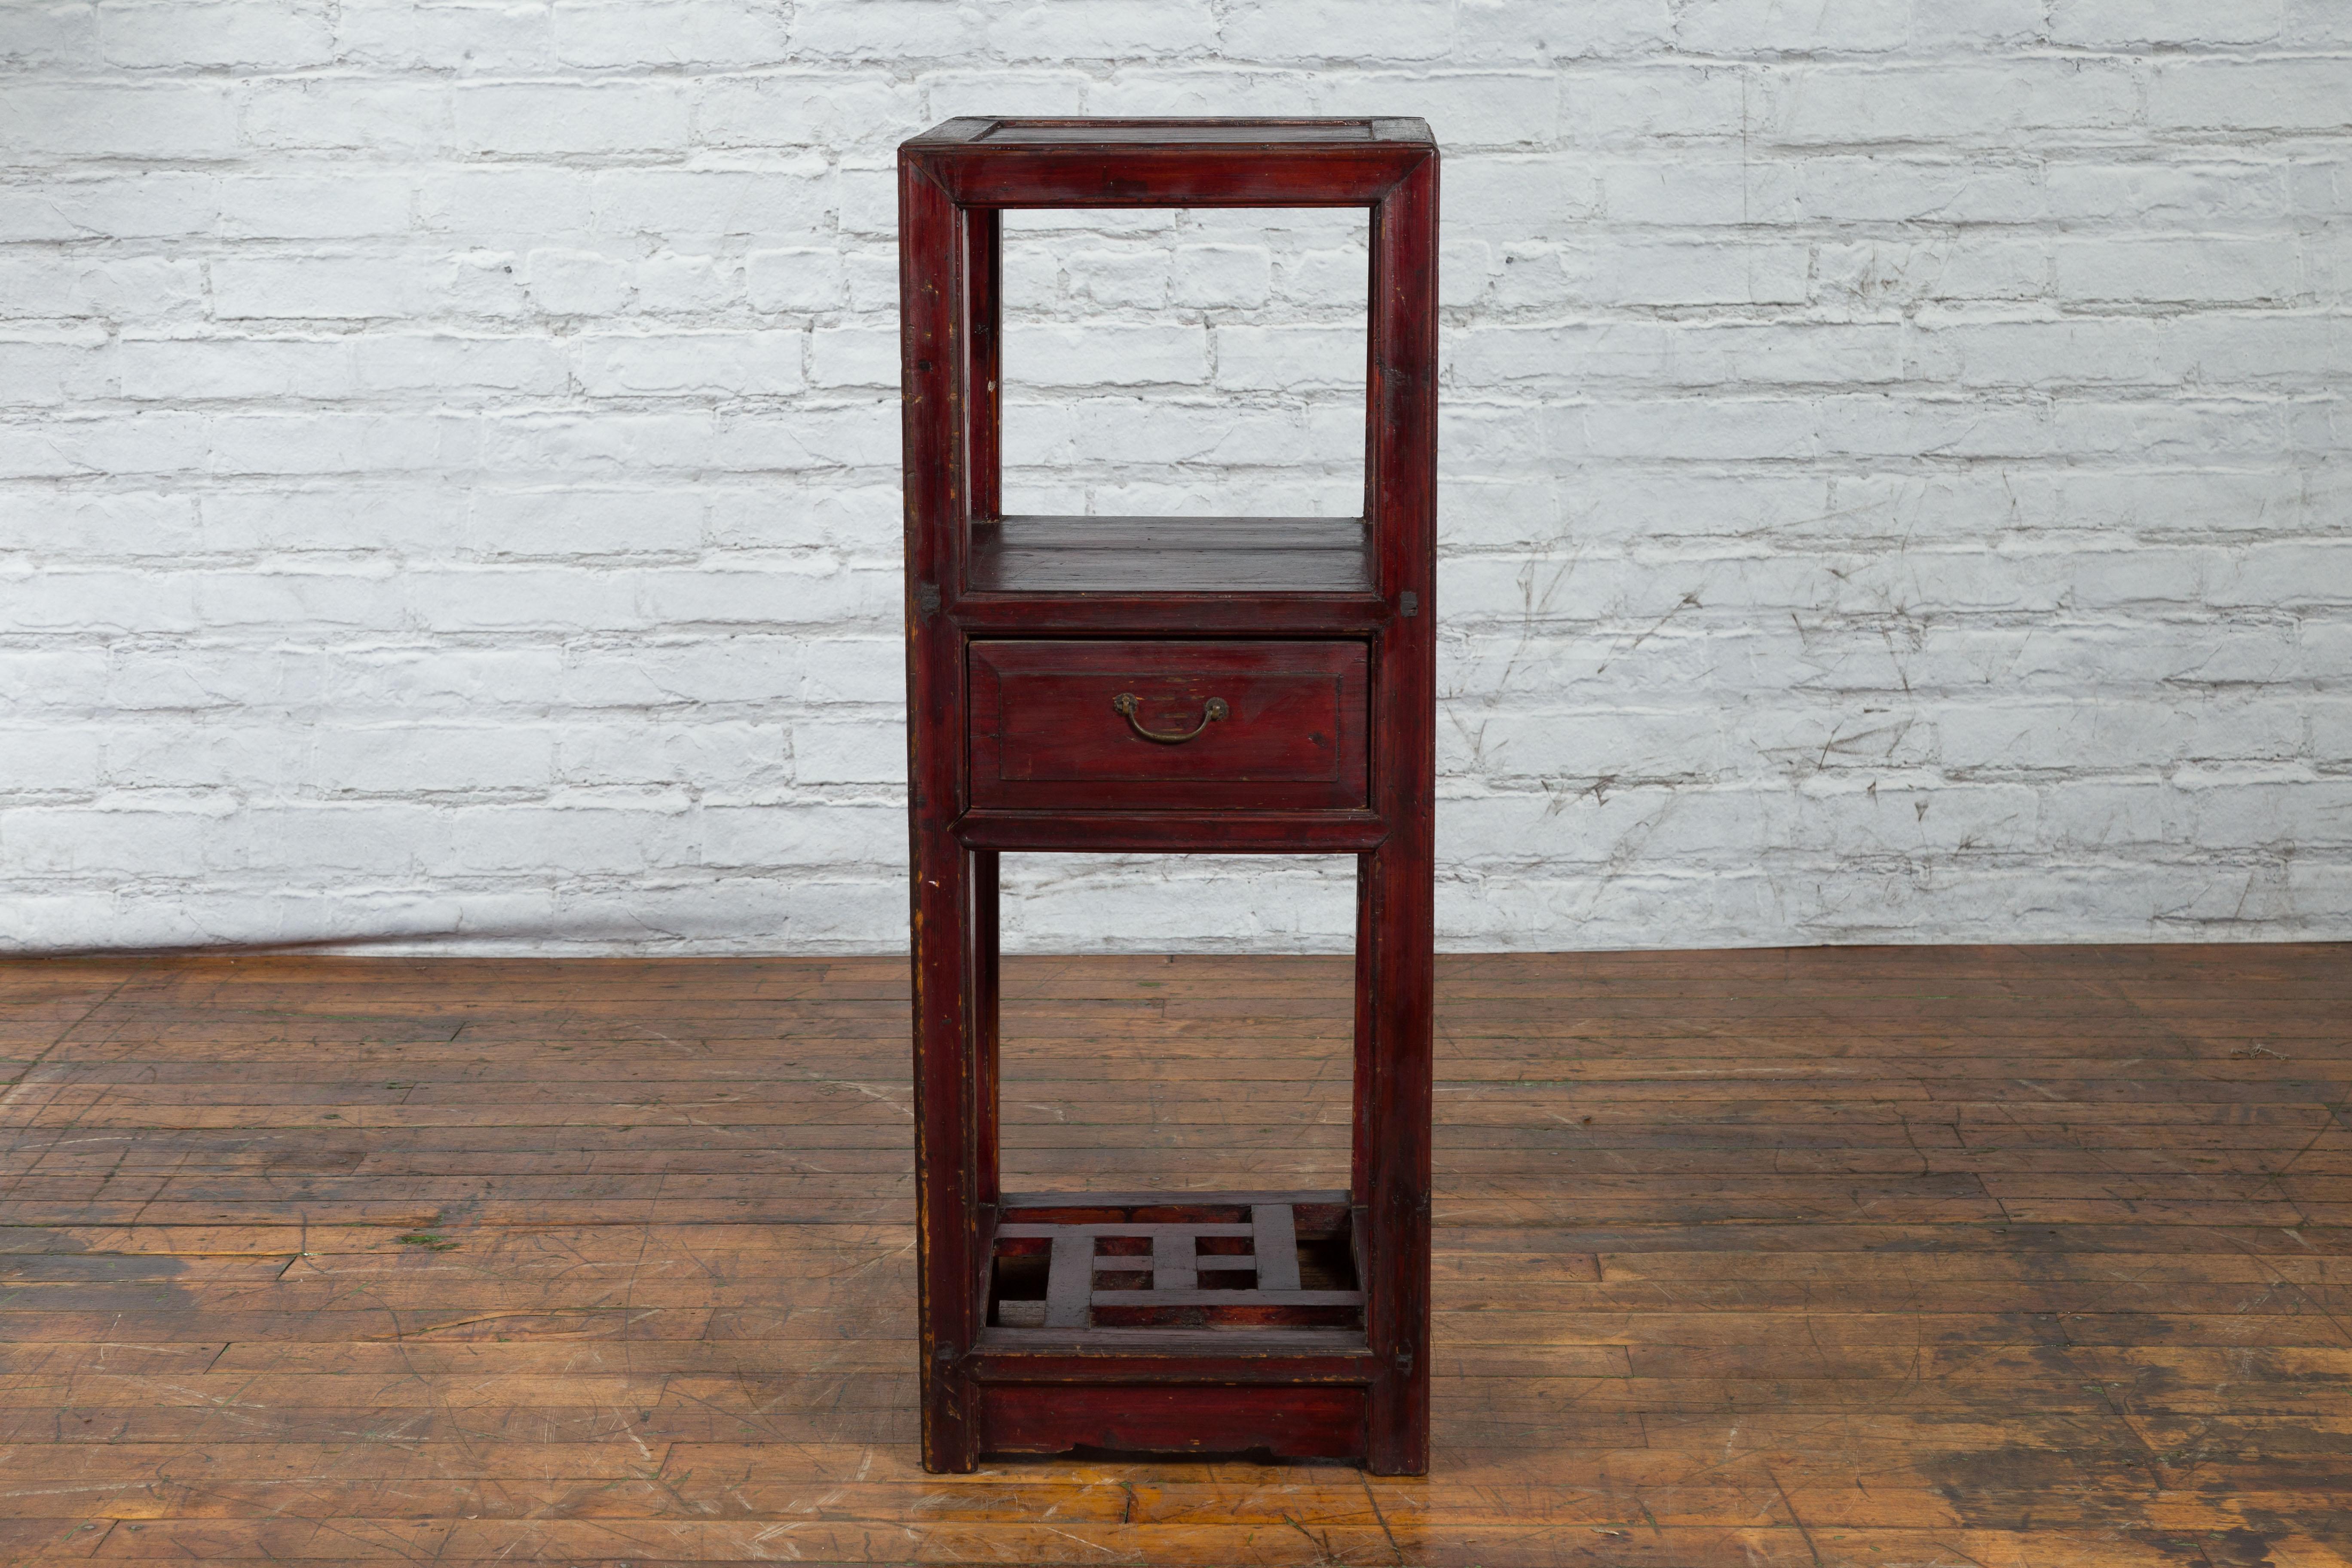 A Chinese late Qing Dynasty period tiered side table from the early 20th century with reddish brown lacquer, carved fretwork shelf and single drawer. Created in China during the late Qing Dynasty period in the early years of the 20th century, this